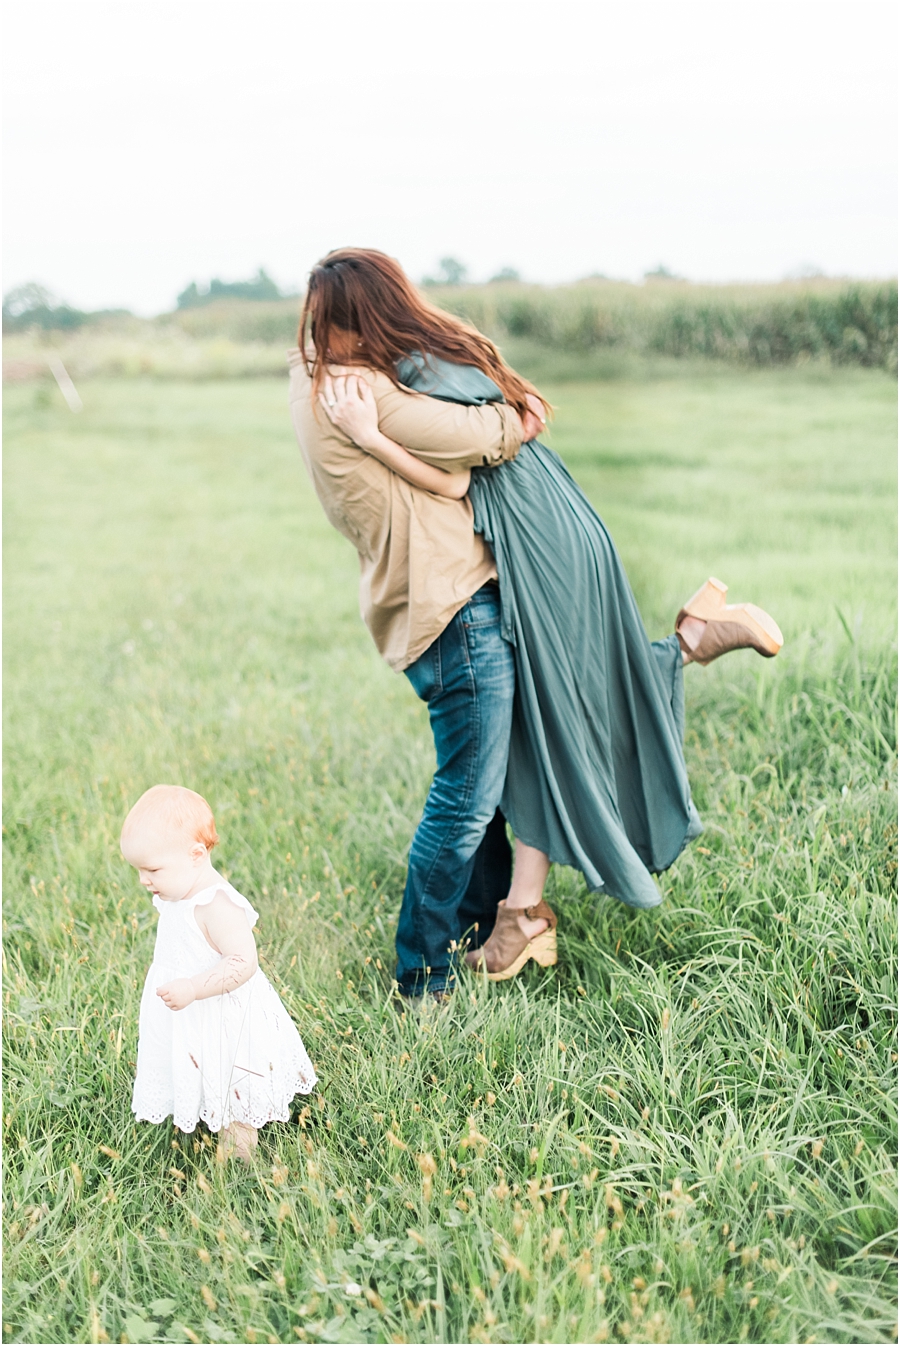 Pregnancy Reveal photographed by North Carolina film photographer Hillary Muelleck